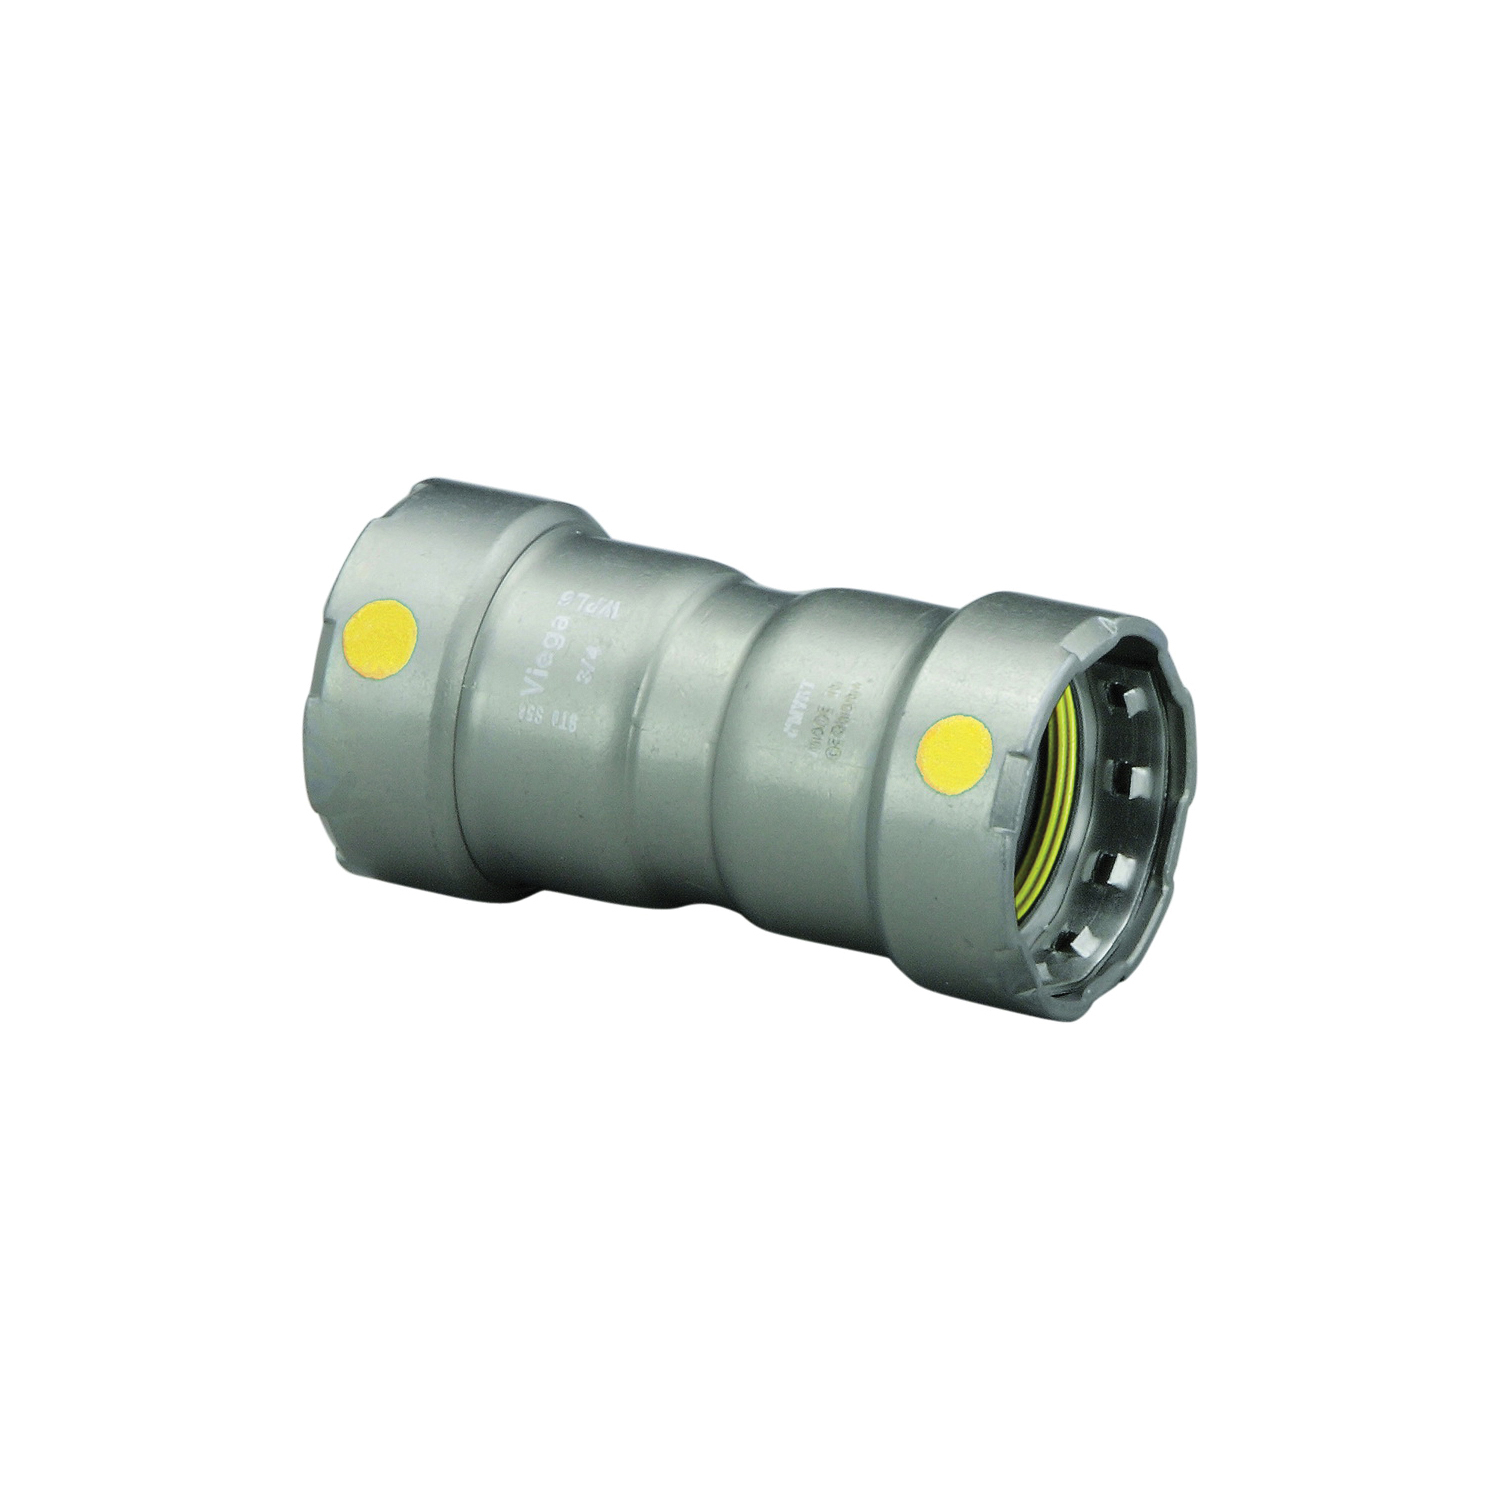 MegaPress®G 25011 Pipe Coupling With Stop, 1 in Nominal, Press End Style, Carbon Steel, Import